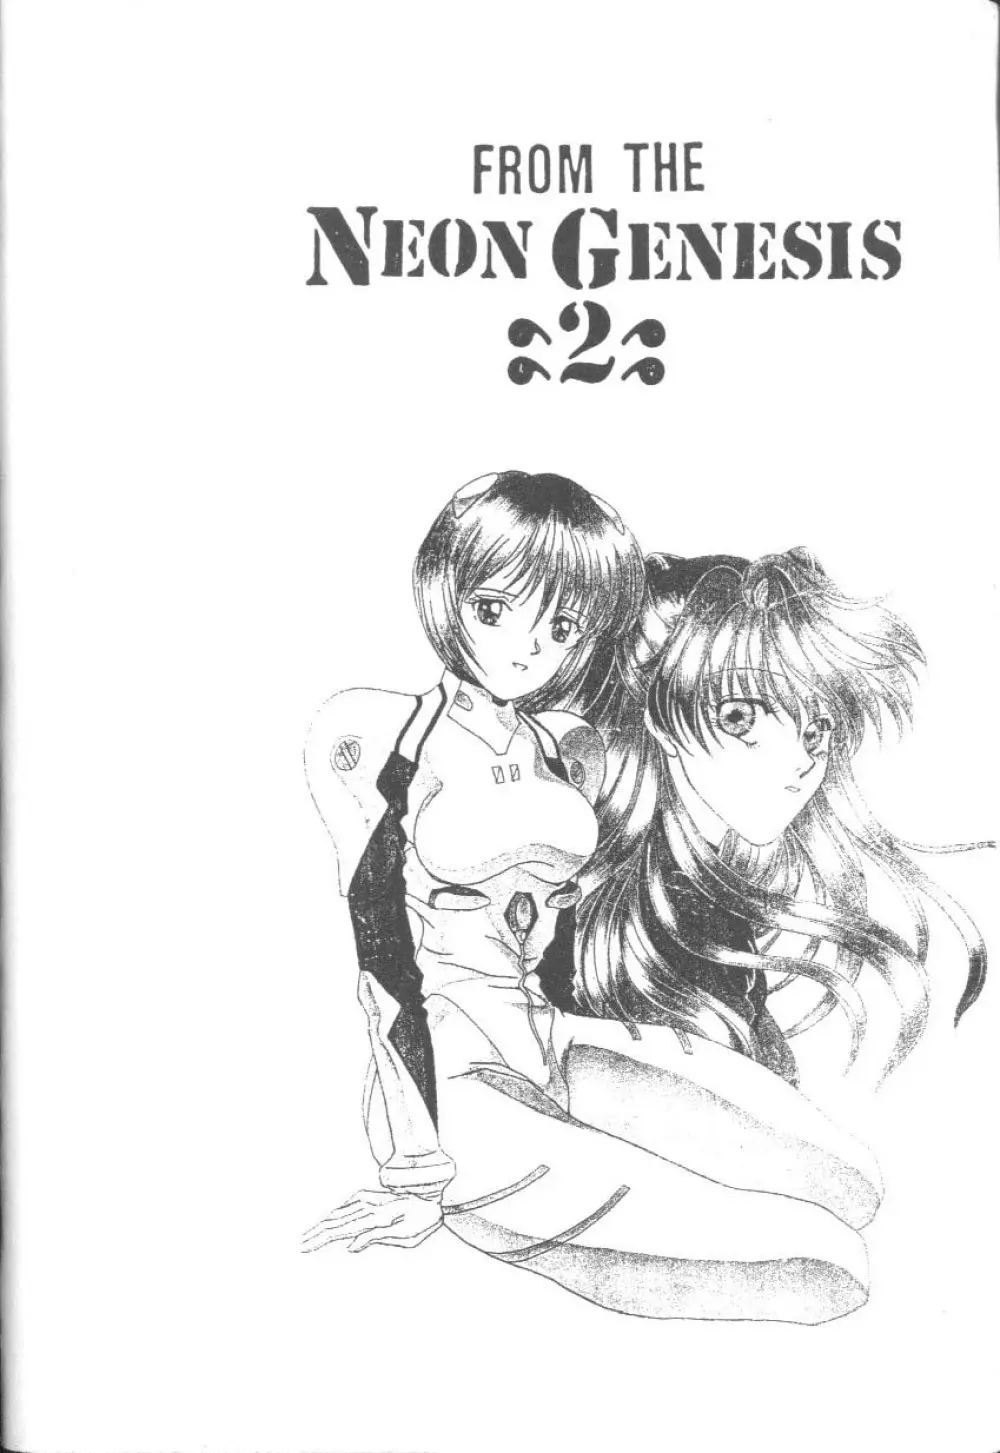 From The Neon Genesis 02 4ページ